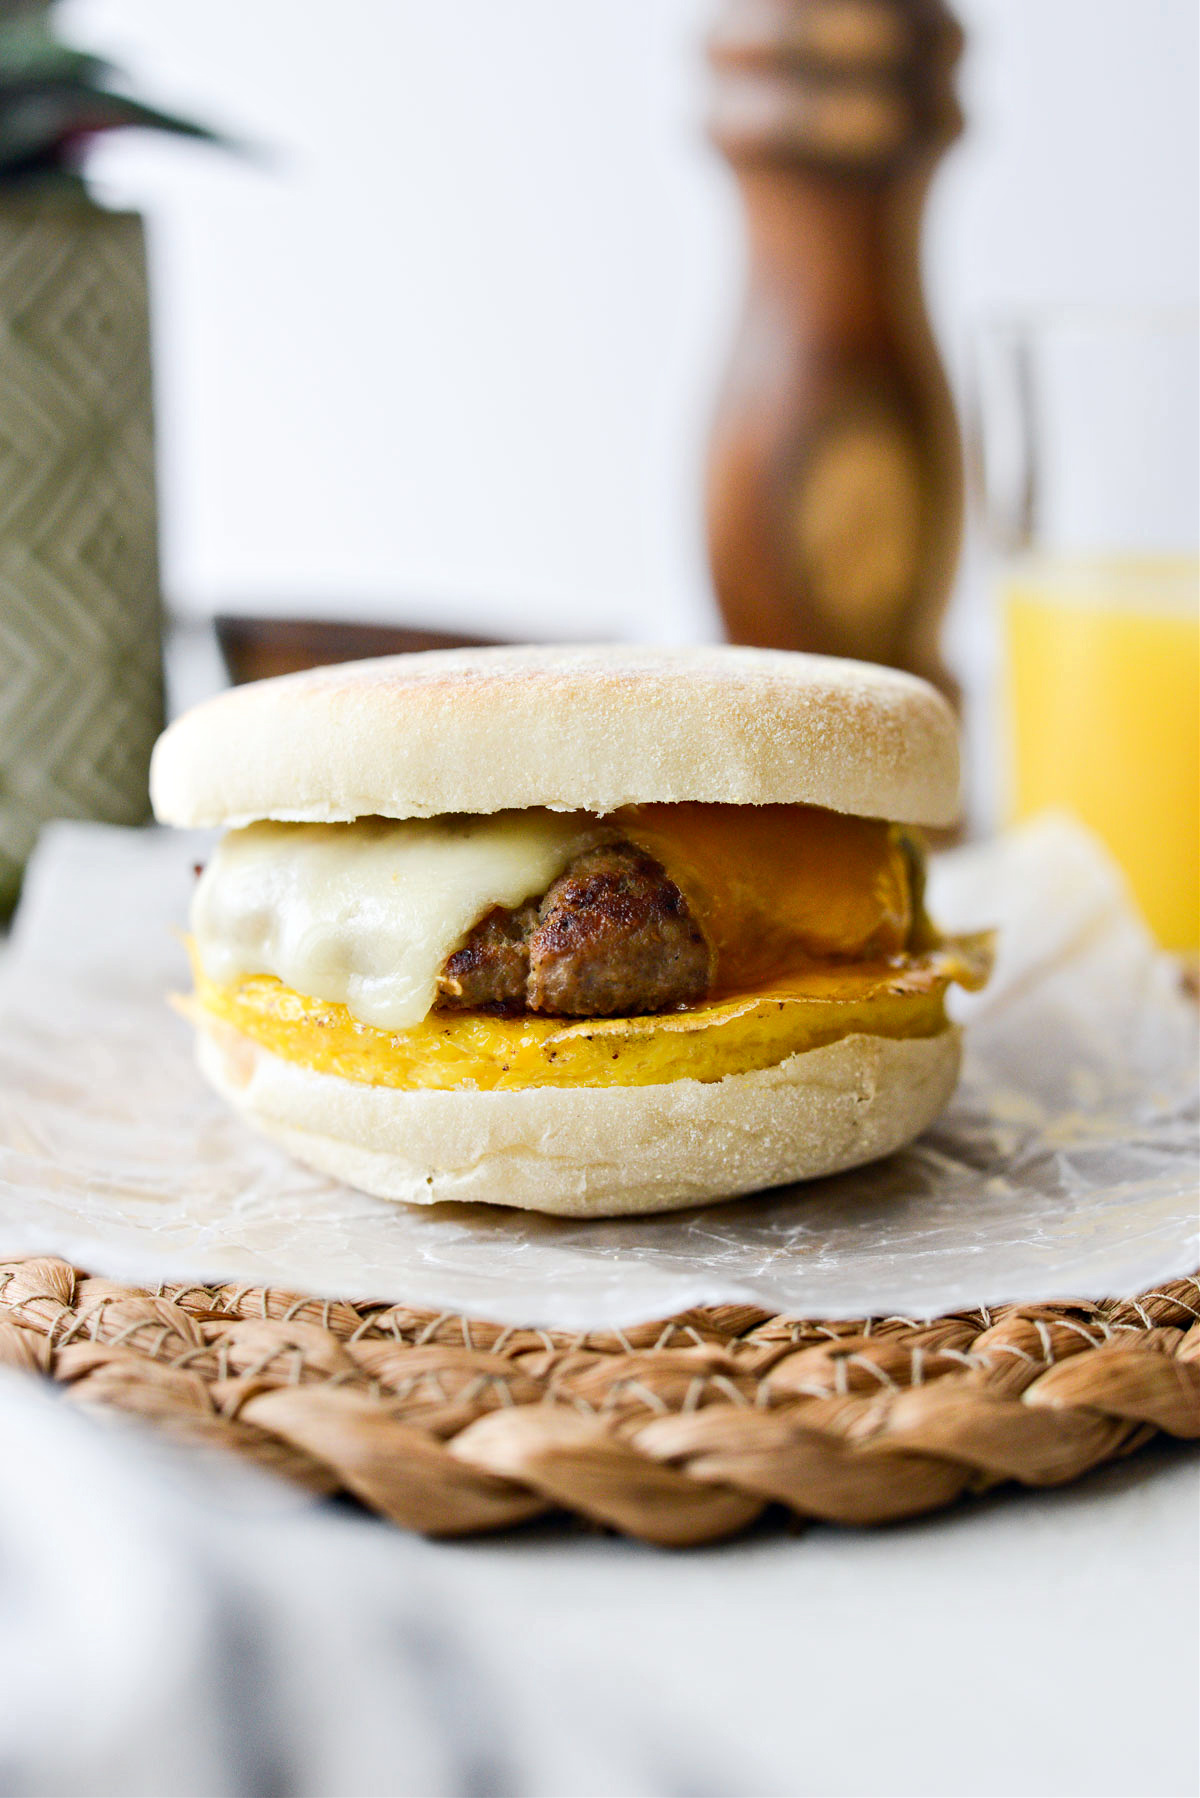 https://www.simplyscratch.com/wp-content/uploads/2023/03/Sausage-Egg-and-Cheese-Breakfast-Sandwich-l-SimplyScratch-20.jpg